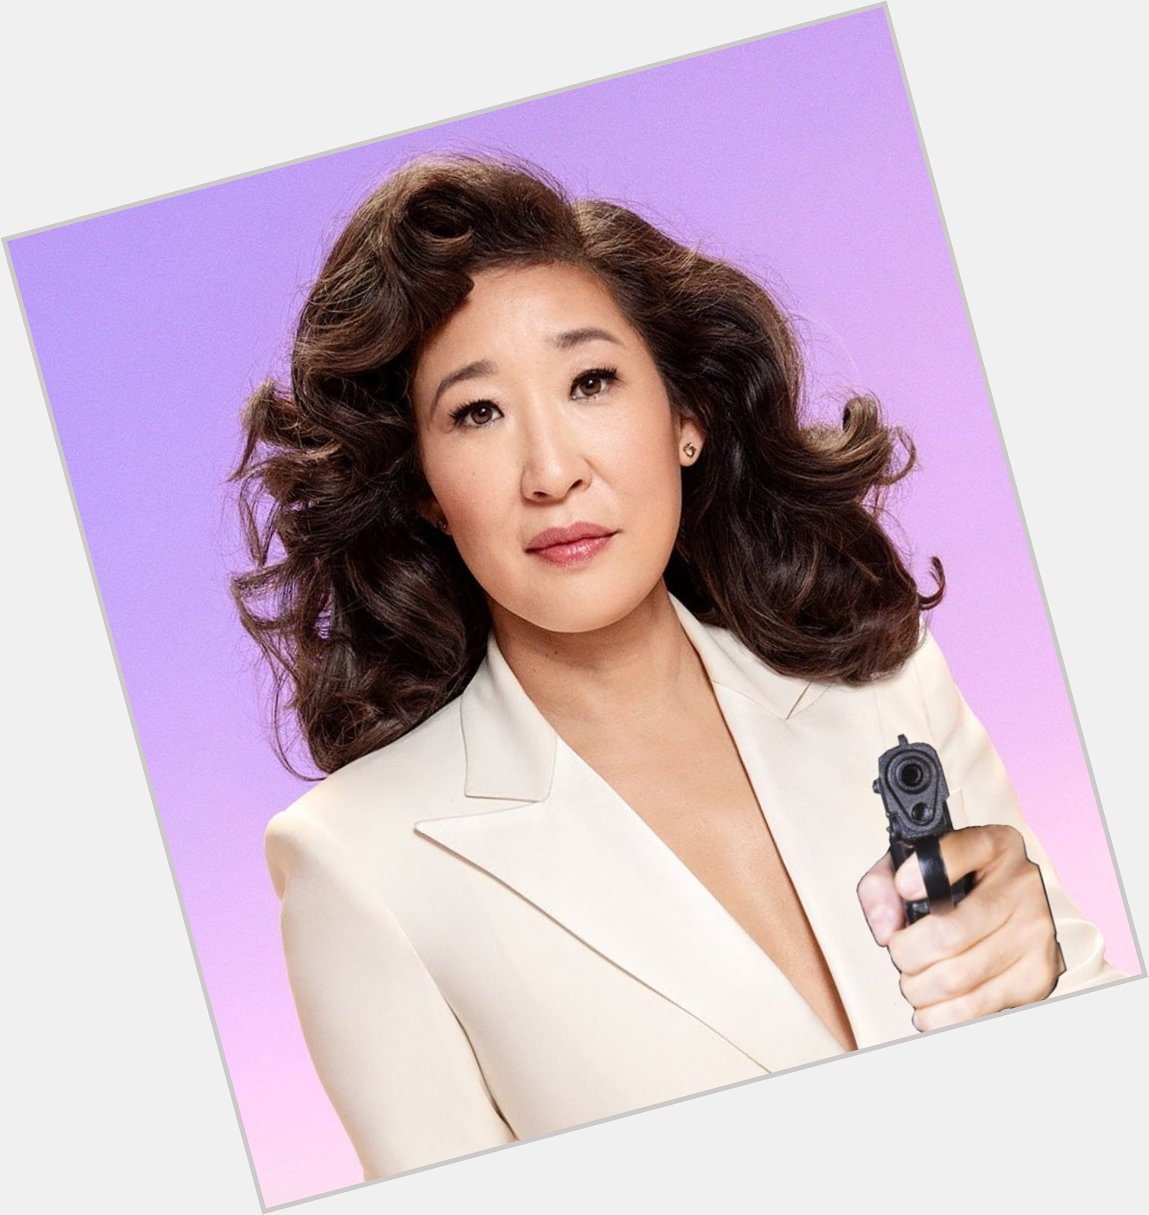 Wish sandra oh a happy bday or else 